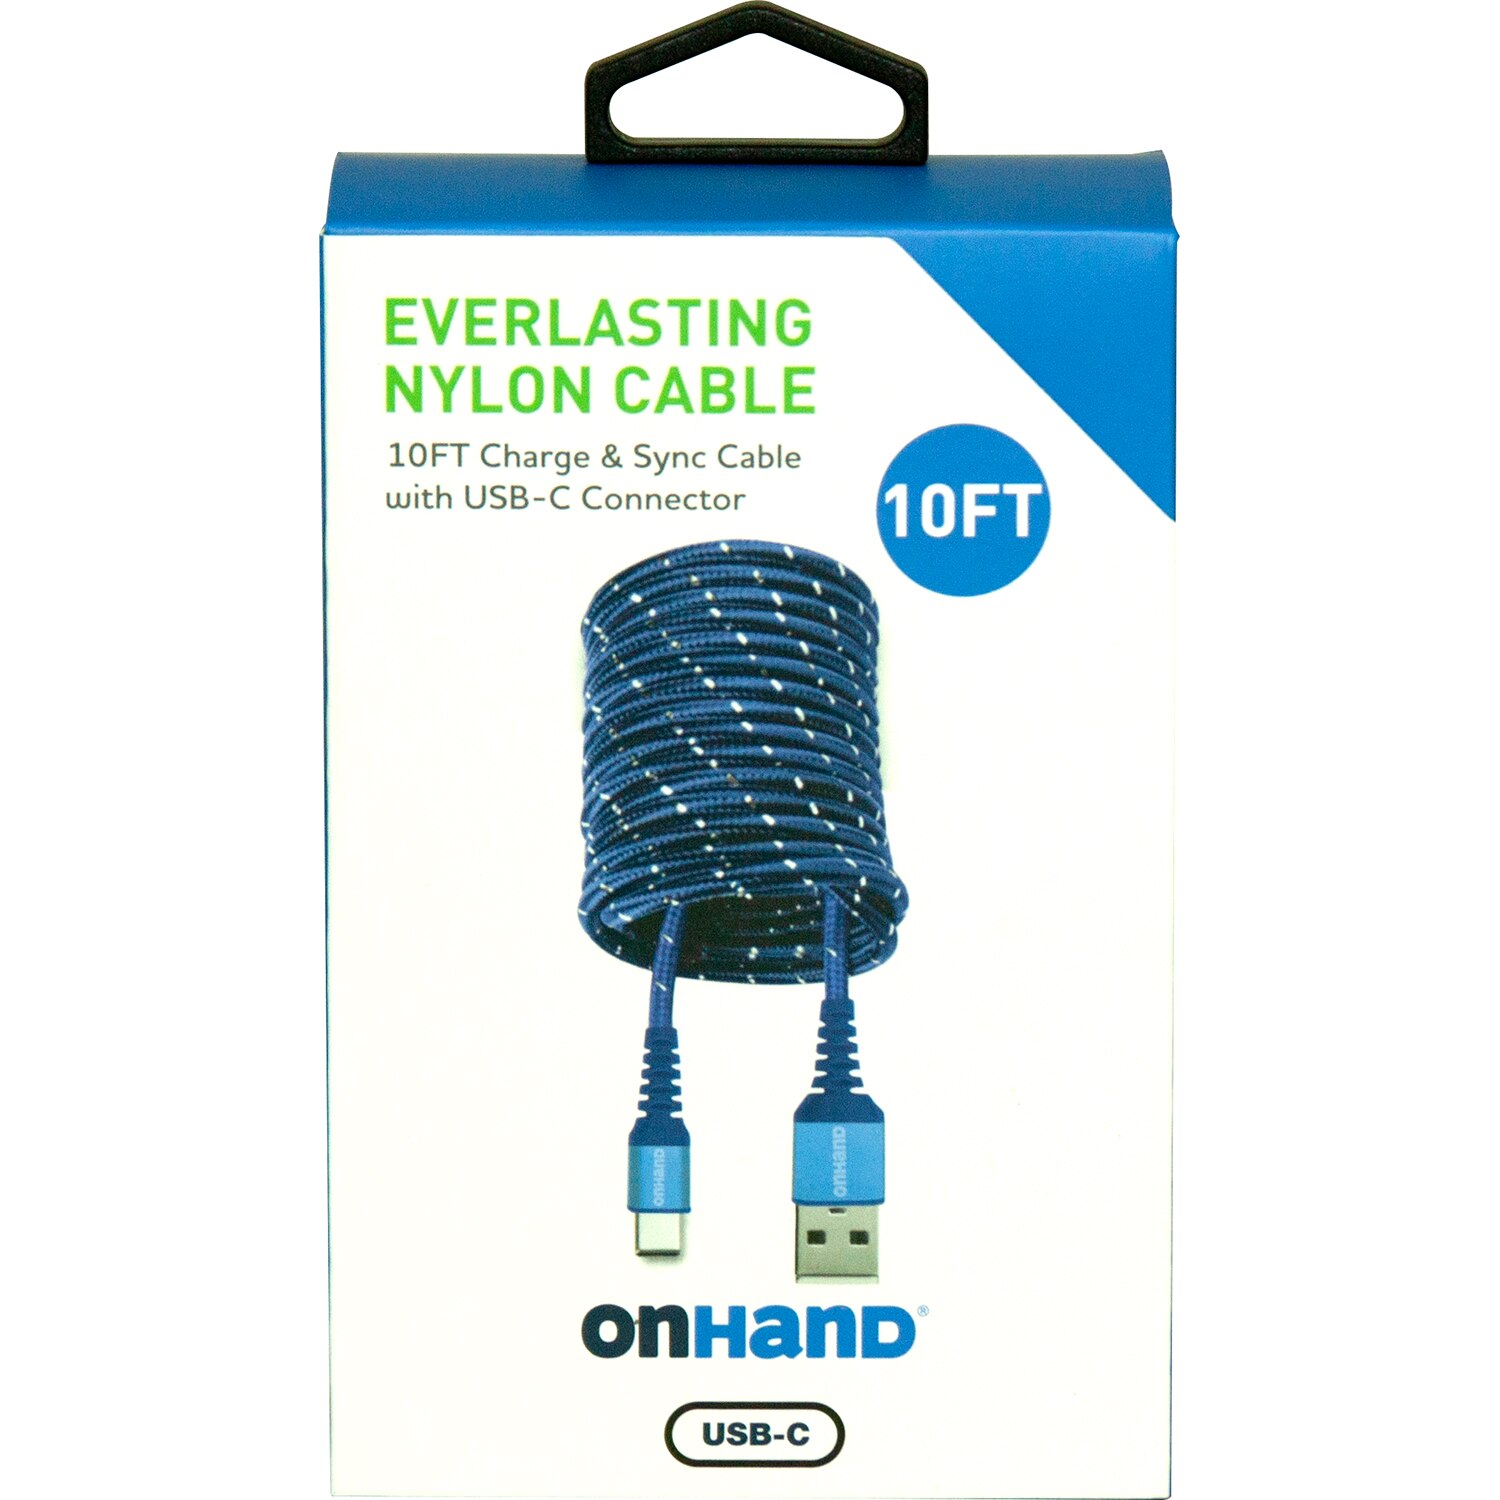 OnHand USB-C Cable 10FT, Blue